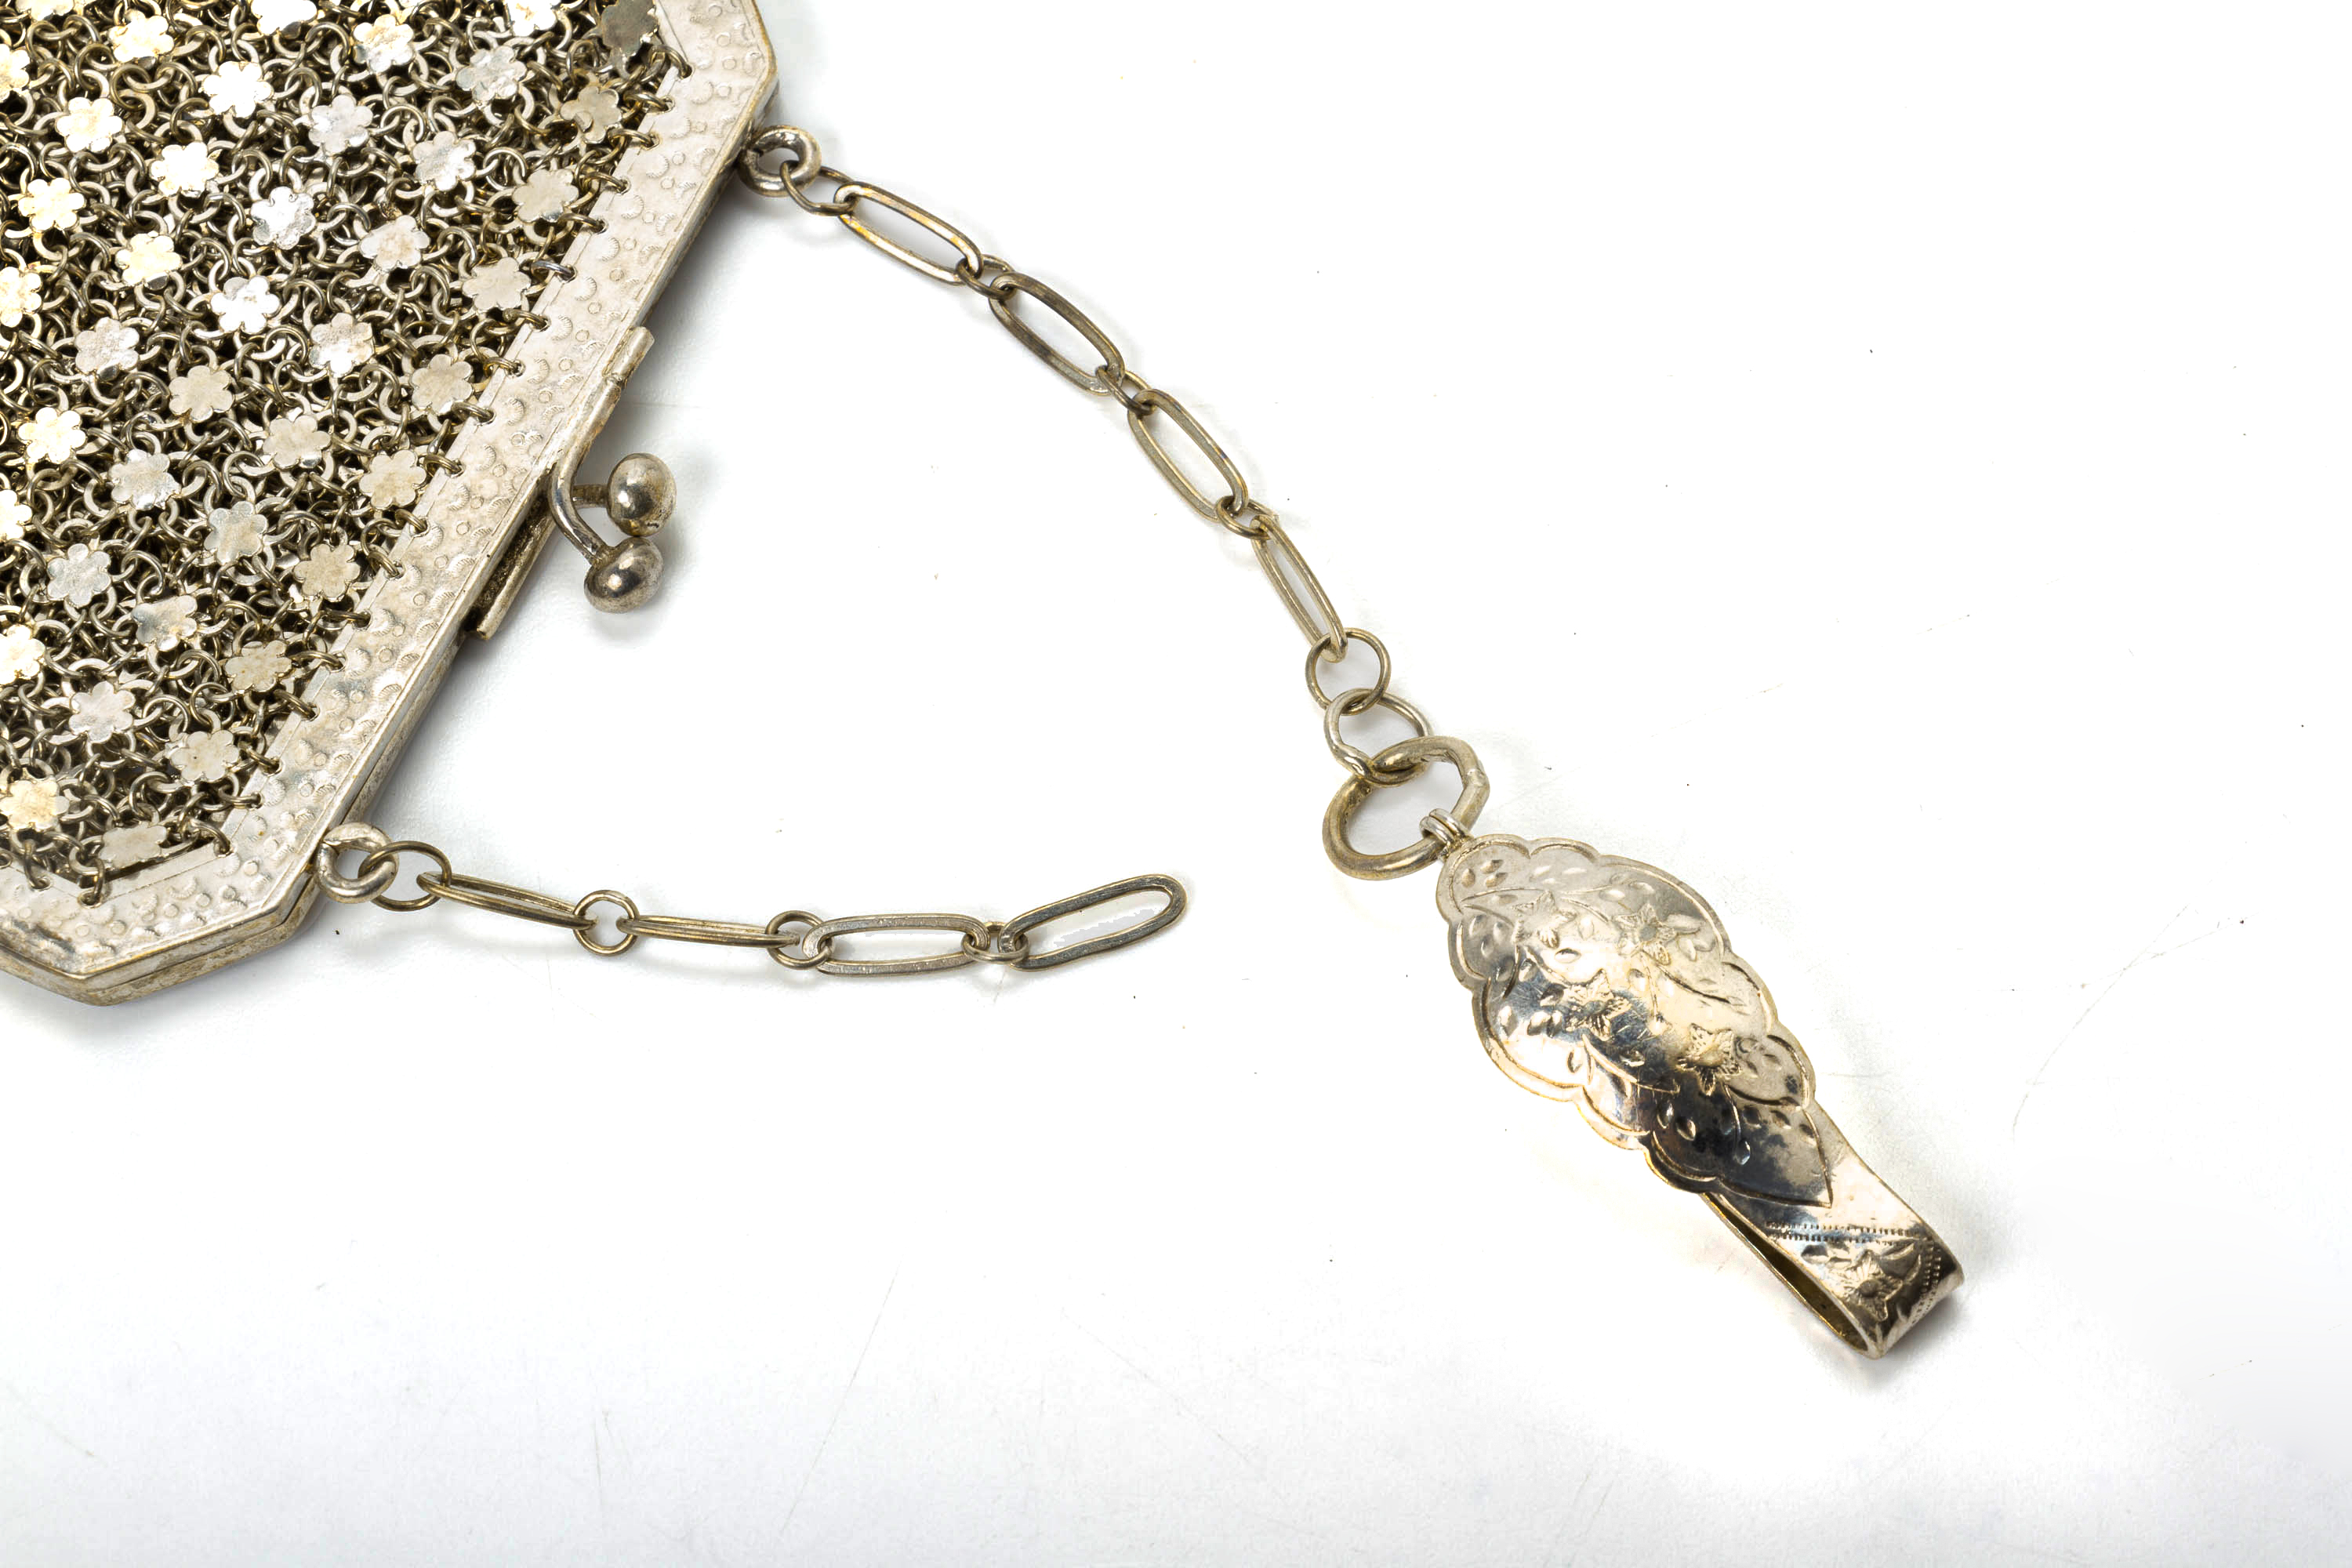 TWO WHITE METAL MESH PURSES WITH CHATELAINE CLIPS - Image 3 of 15